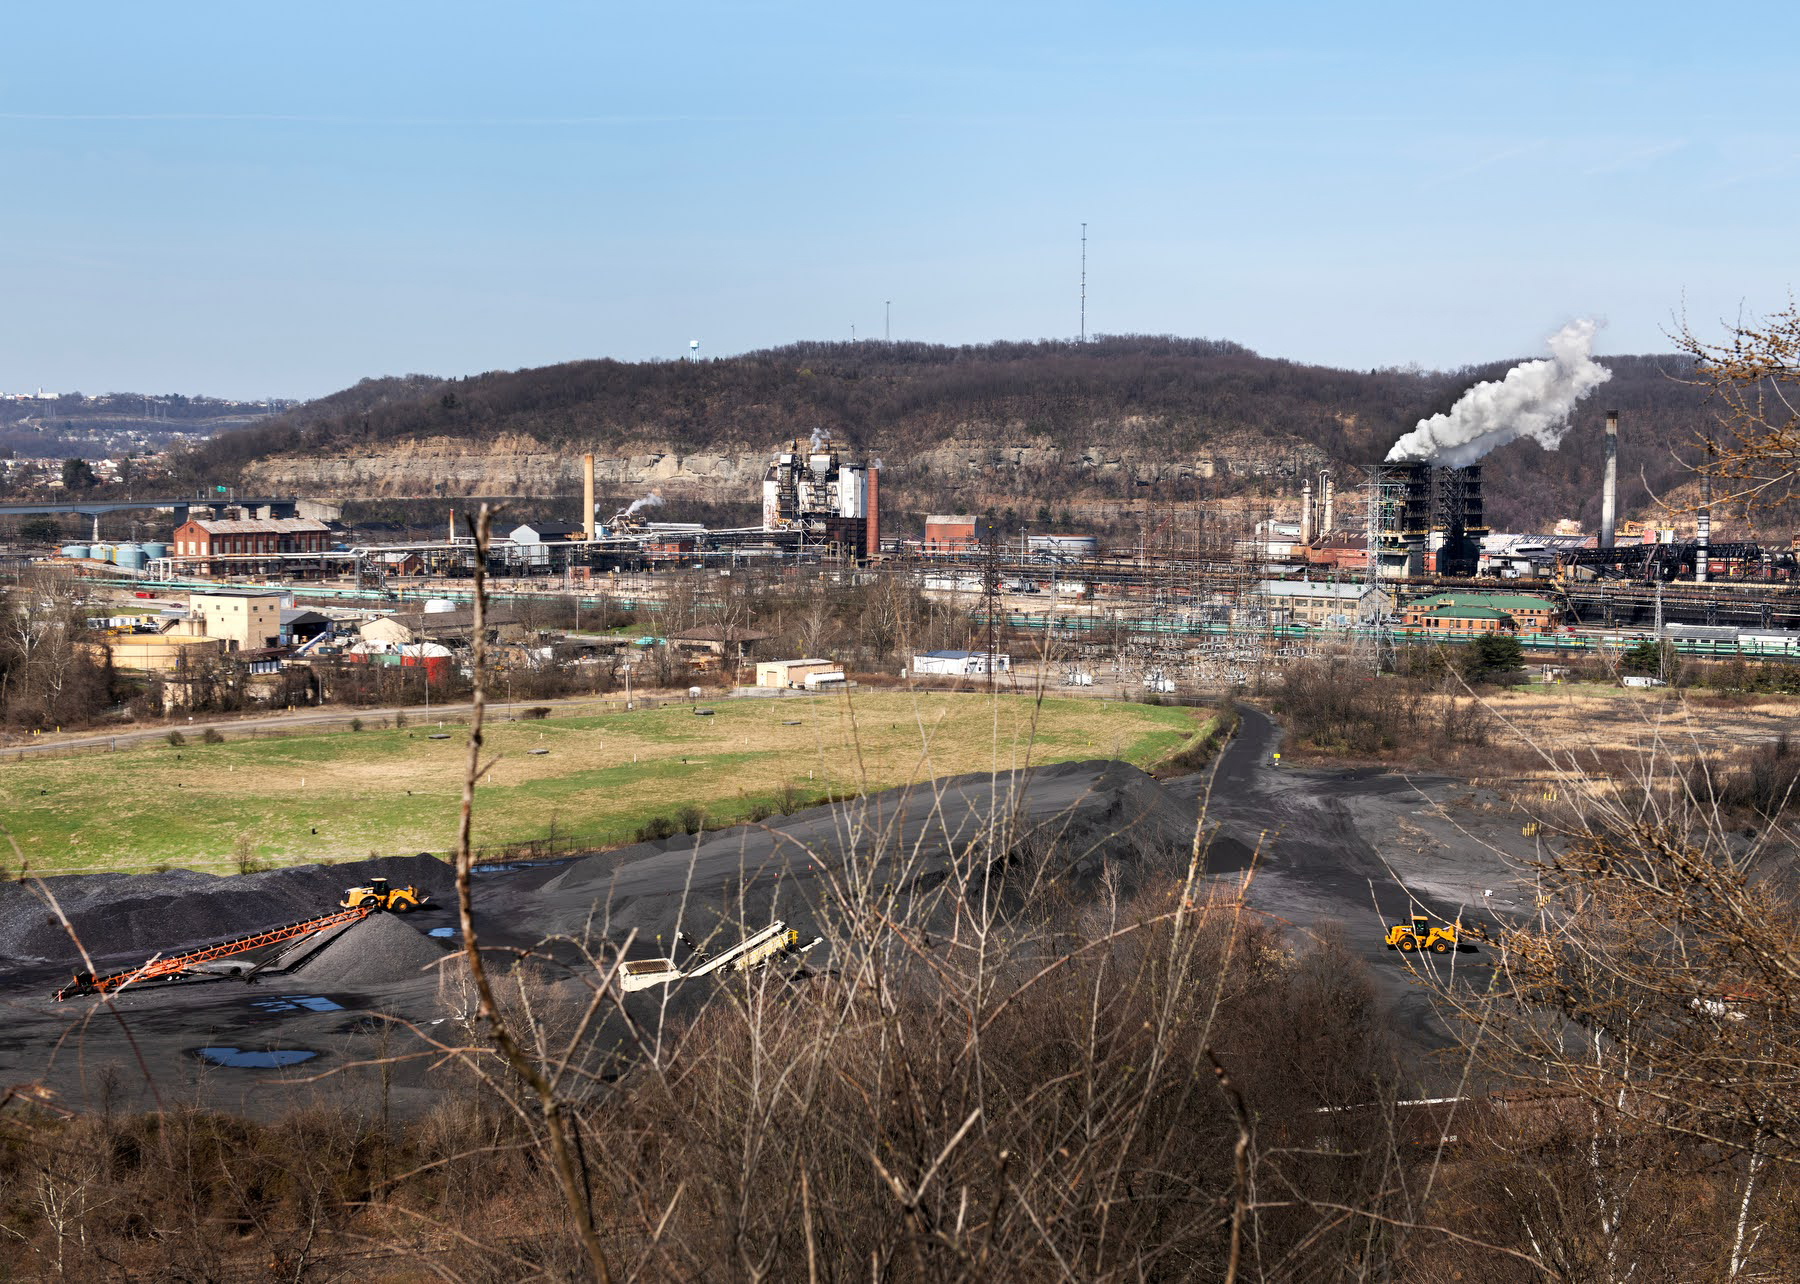 Clairton Coke Works is one of the world’s largest producers of coke, which leads to the emission of a raft of chemicals. Credit: Scott Goldsmith/Inside Climate News